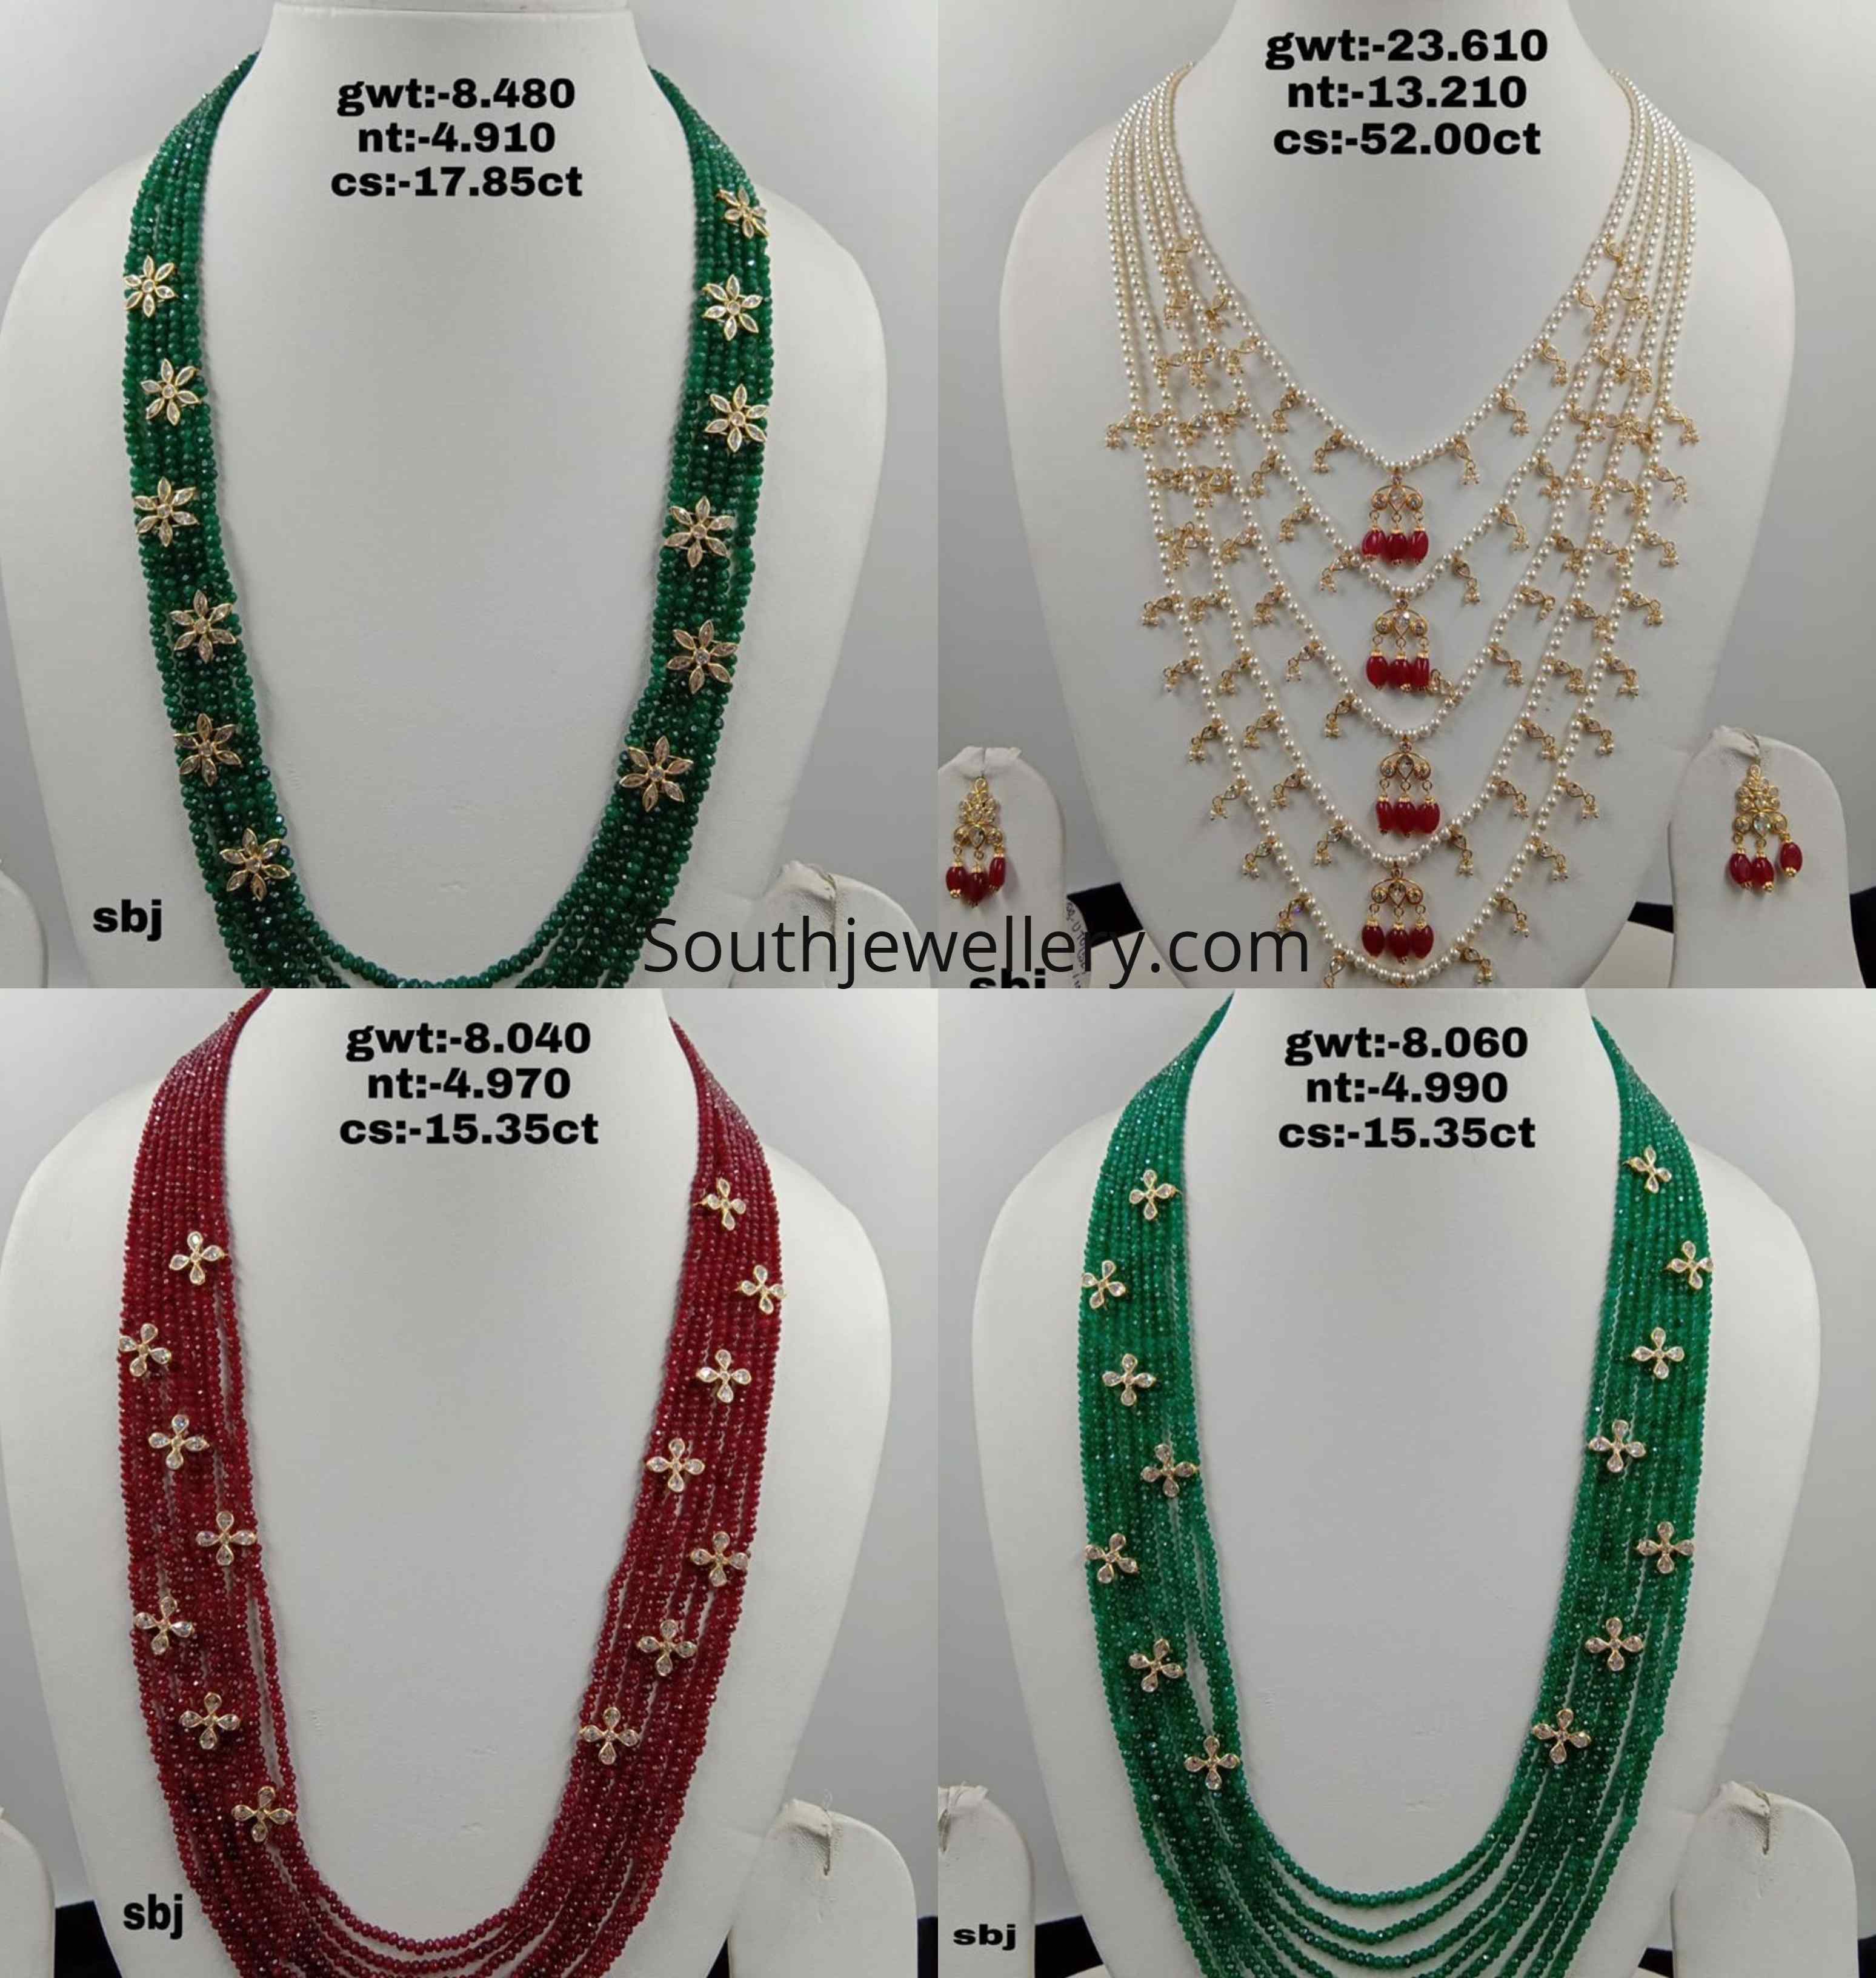 26 30g weight necklace ideas | gold jewelry fashion, gold necklace designs,  gold earrings designs